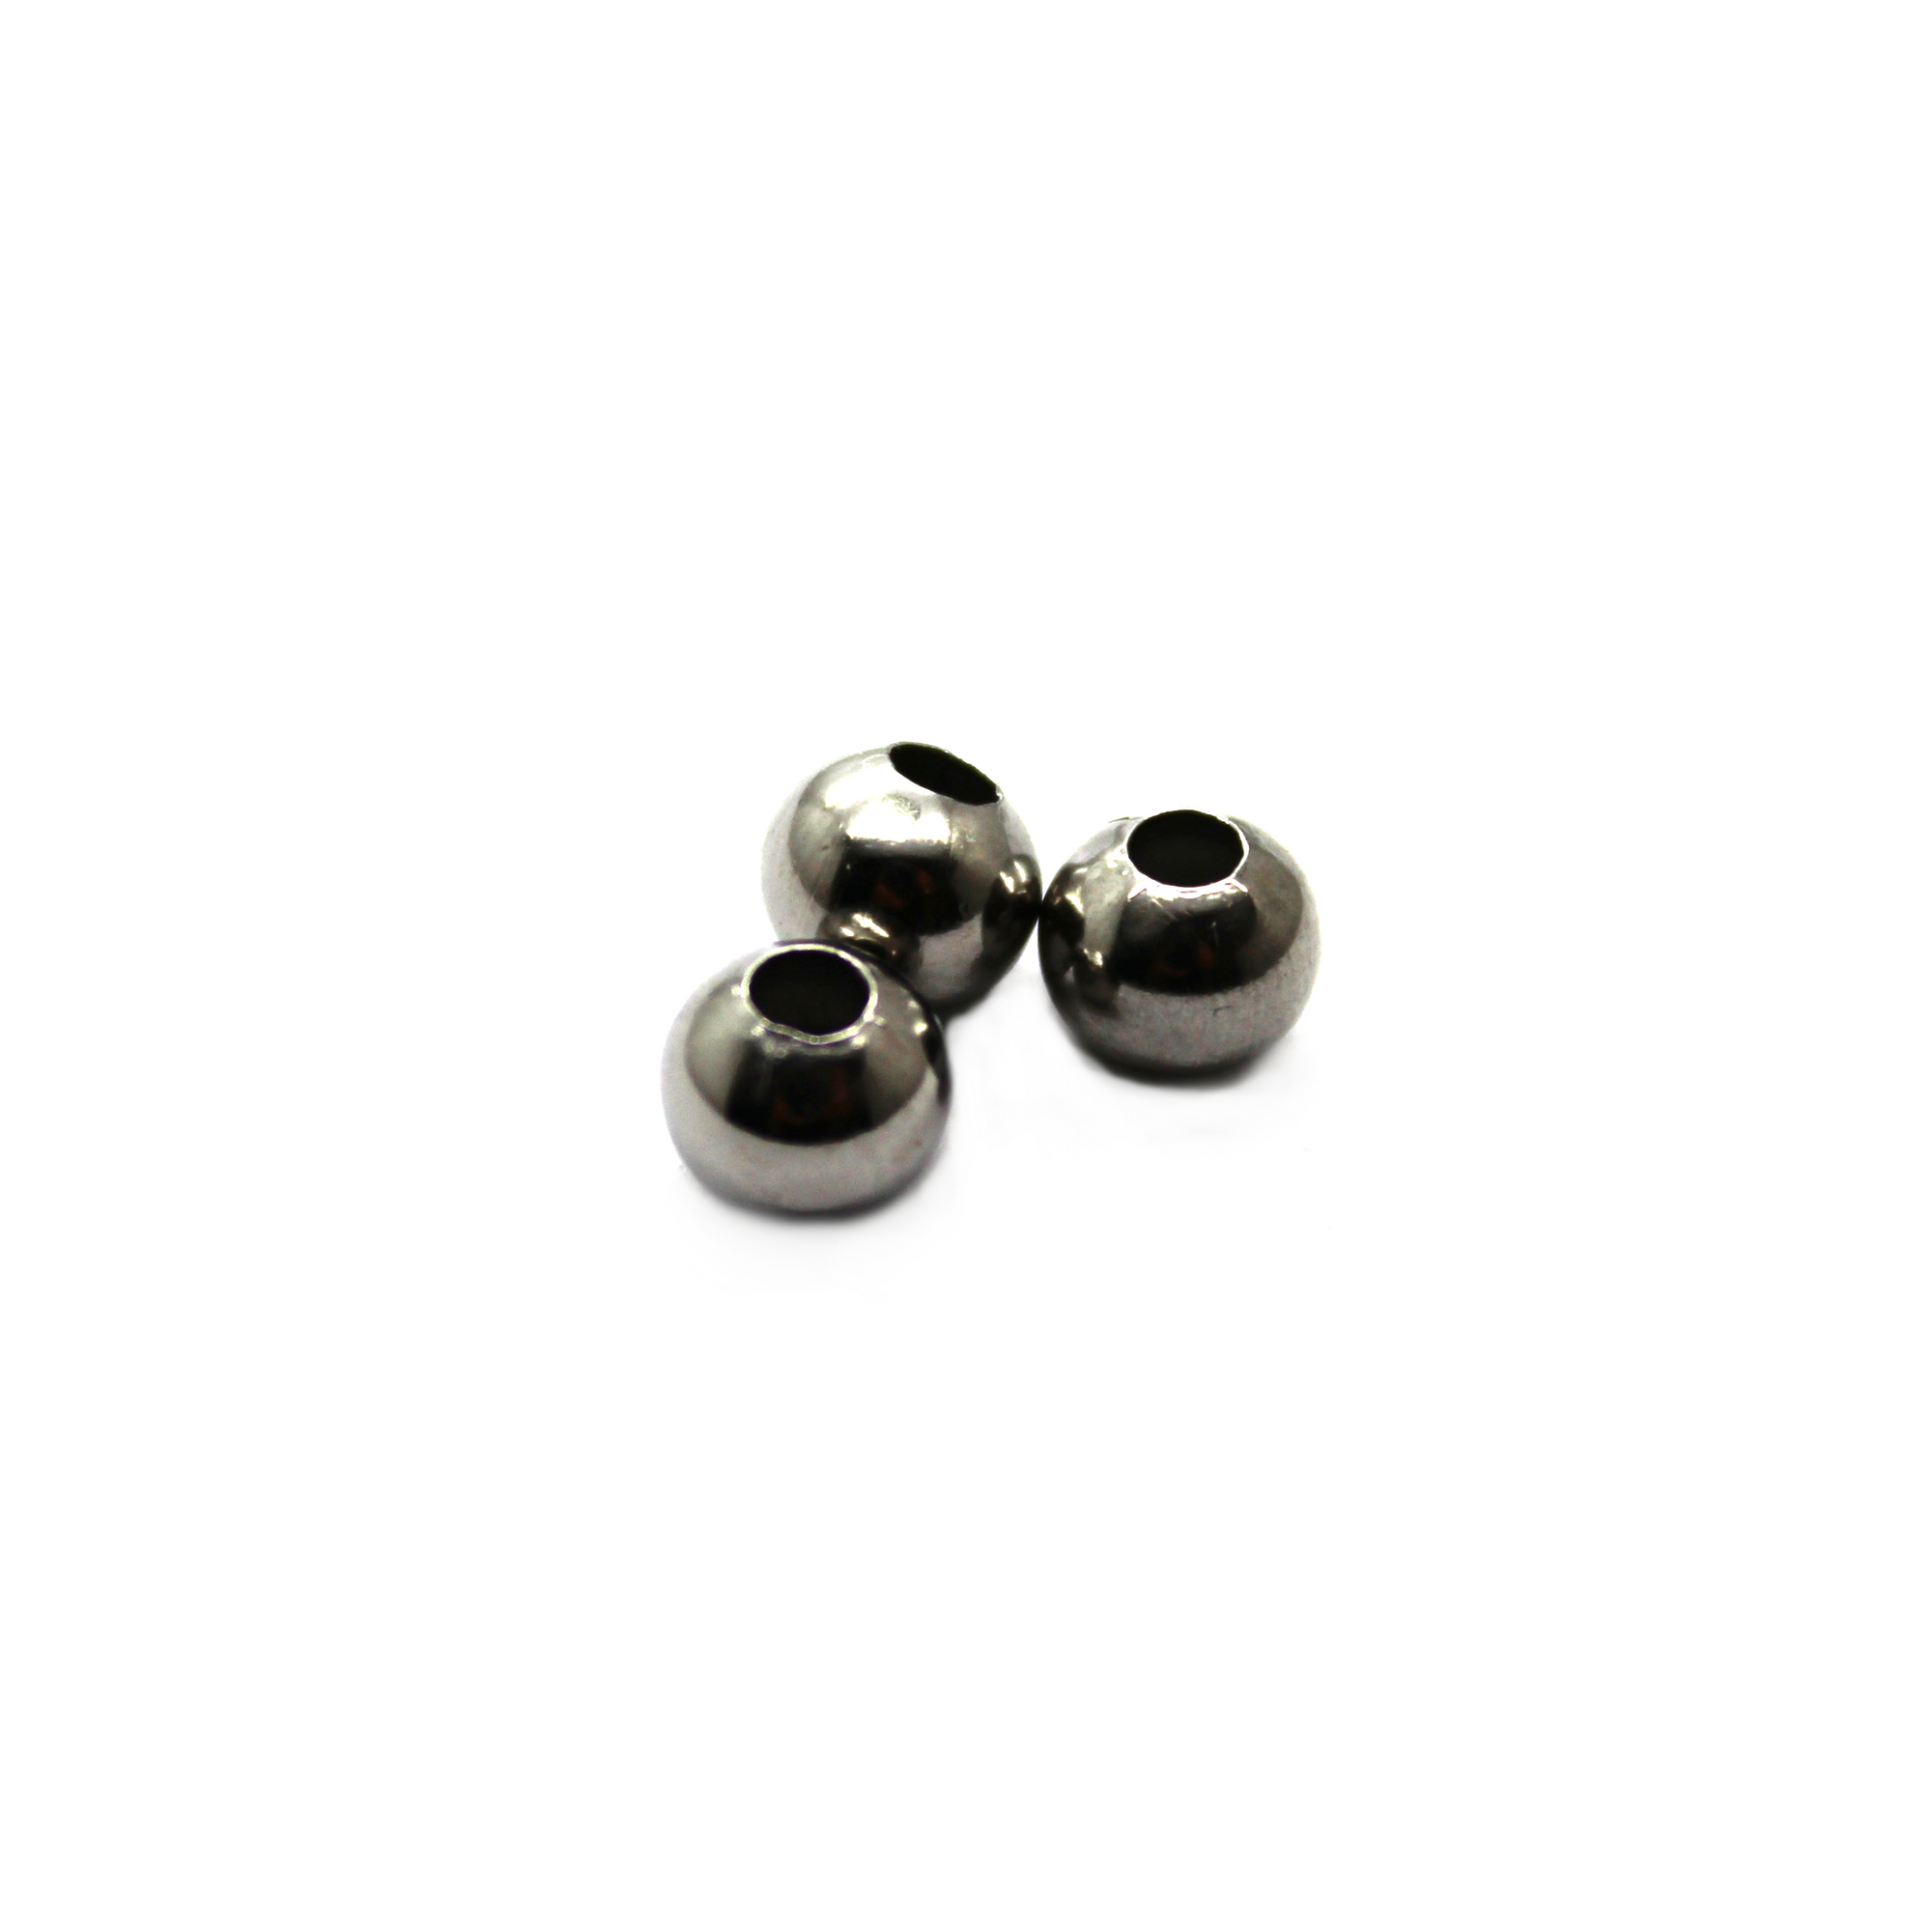 Spacers, Plain Ball Spacer, Stainless Steel, Silver, 6mm X 5mm X 2mm (hole), Sold Per pkg of 30